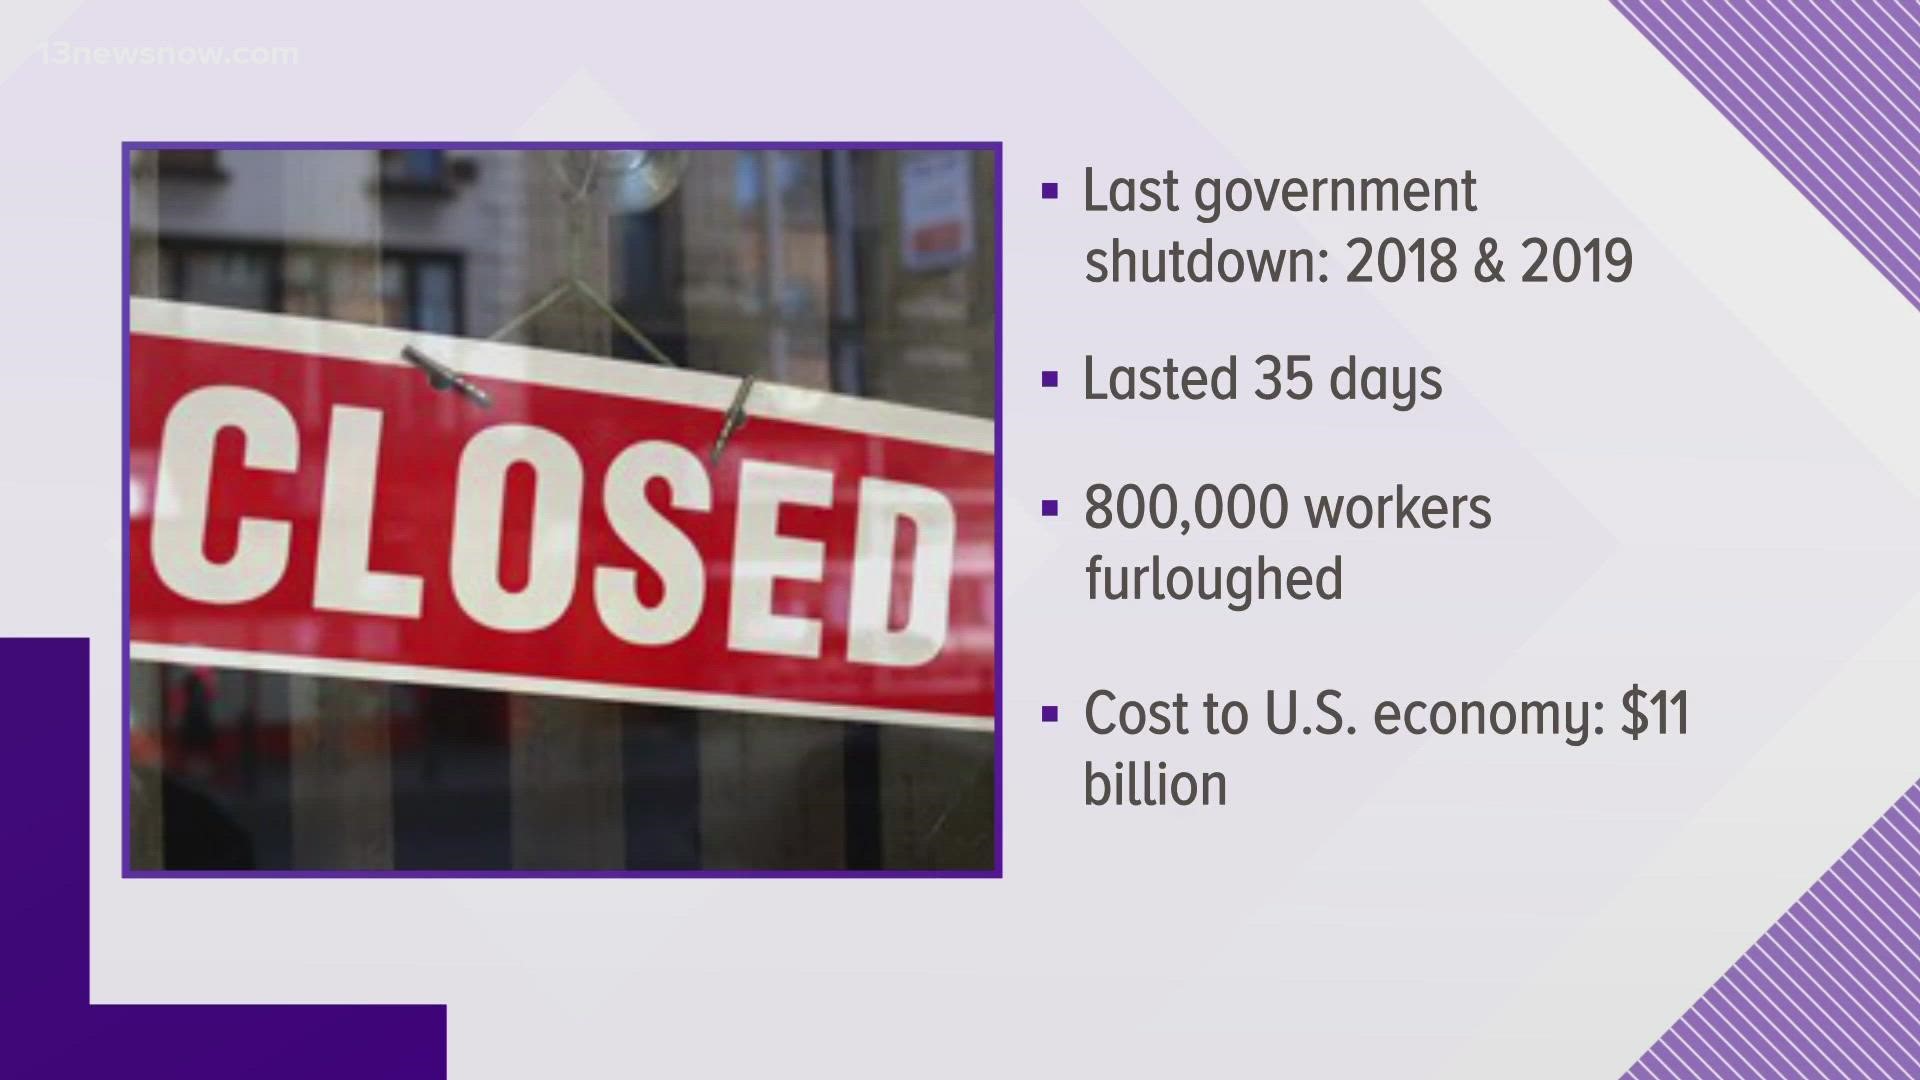 The last government shutdown happened in 2018 and 2019, and lasted 35 days. It affected 800,000 federal workers.